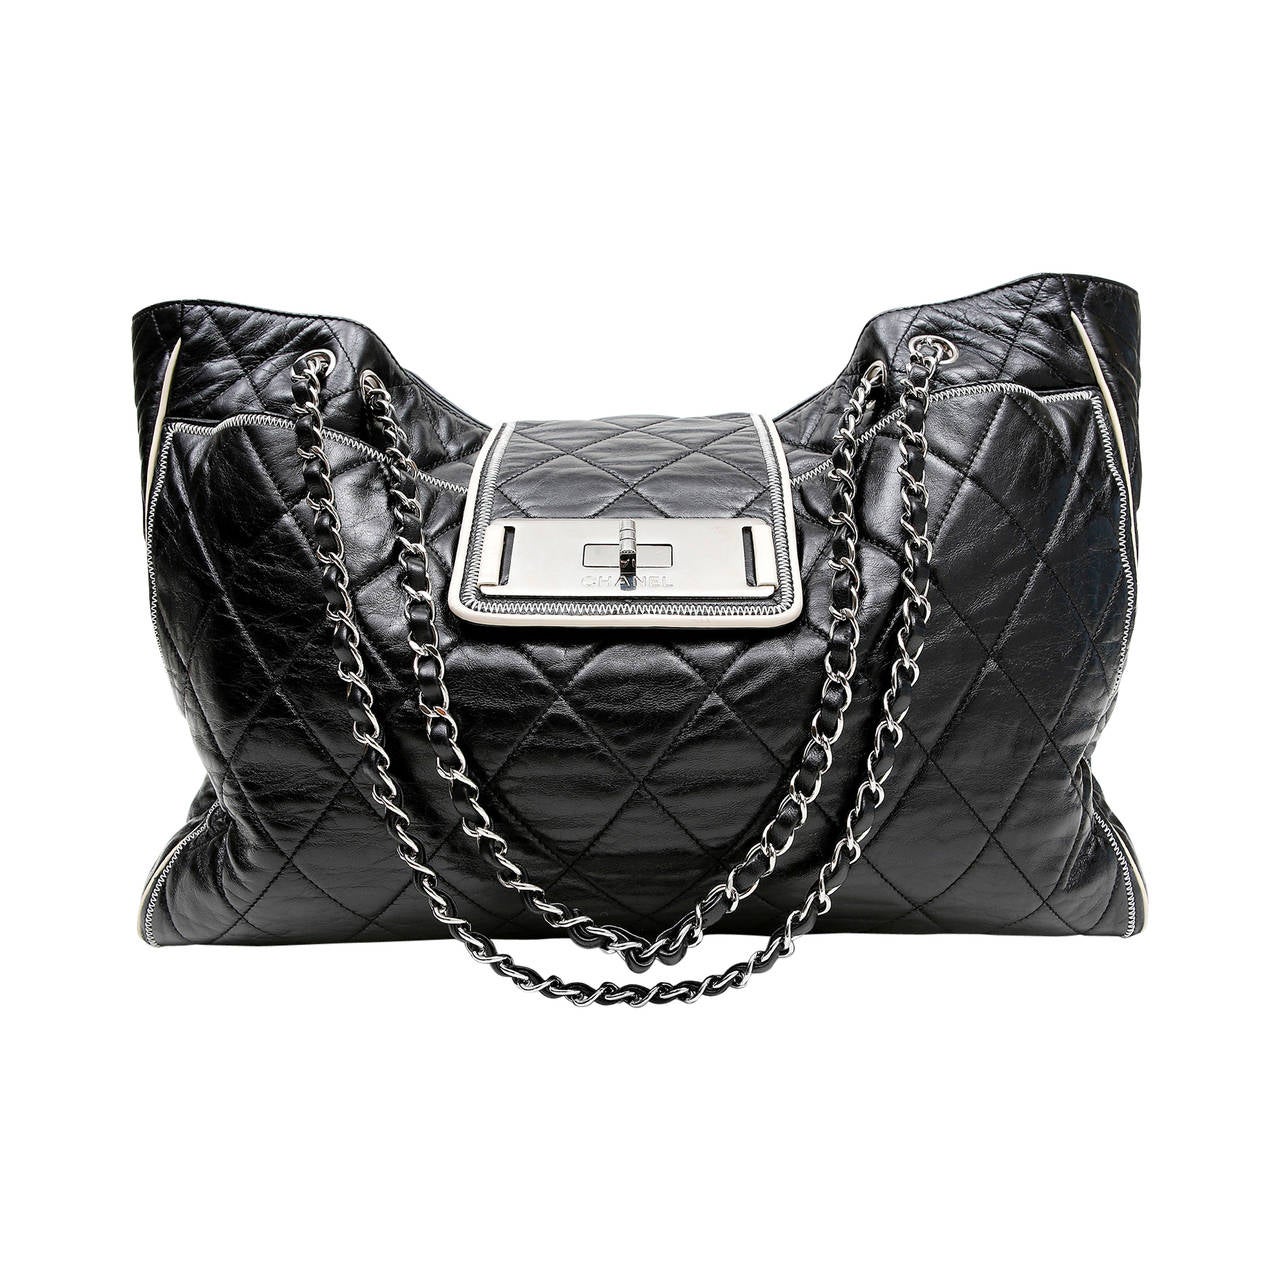 Chanel Black Leather East West Large Tote Bag